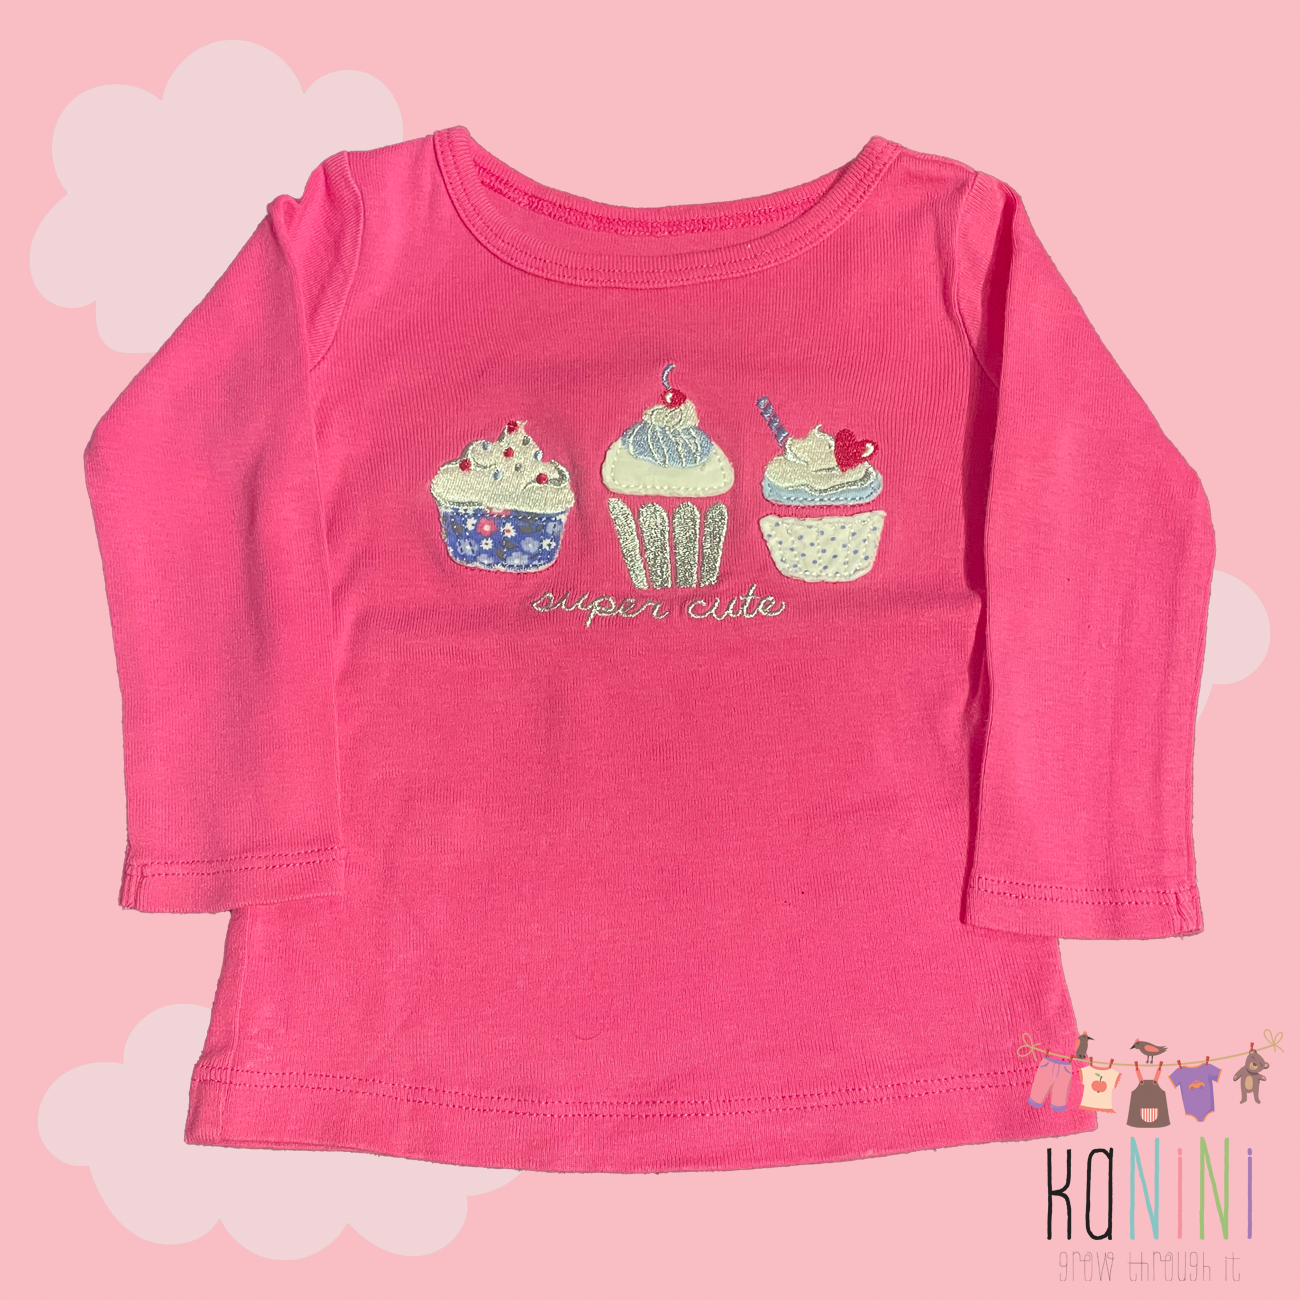 Featured image for “Carter's 6 Months Girls Long Sleeve T-Shirt”